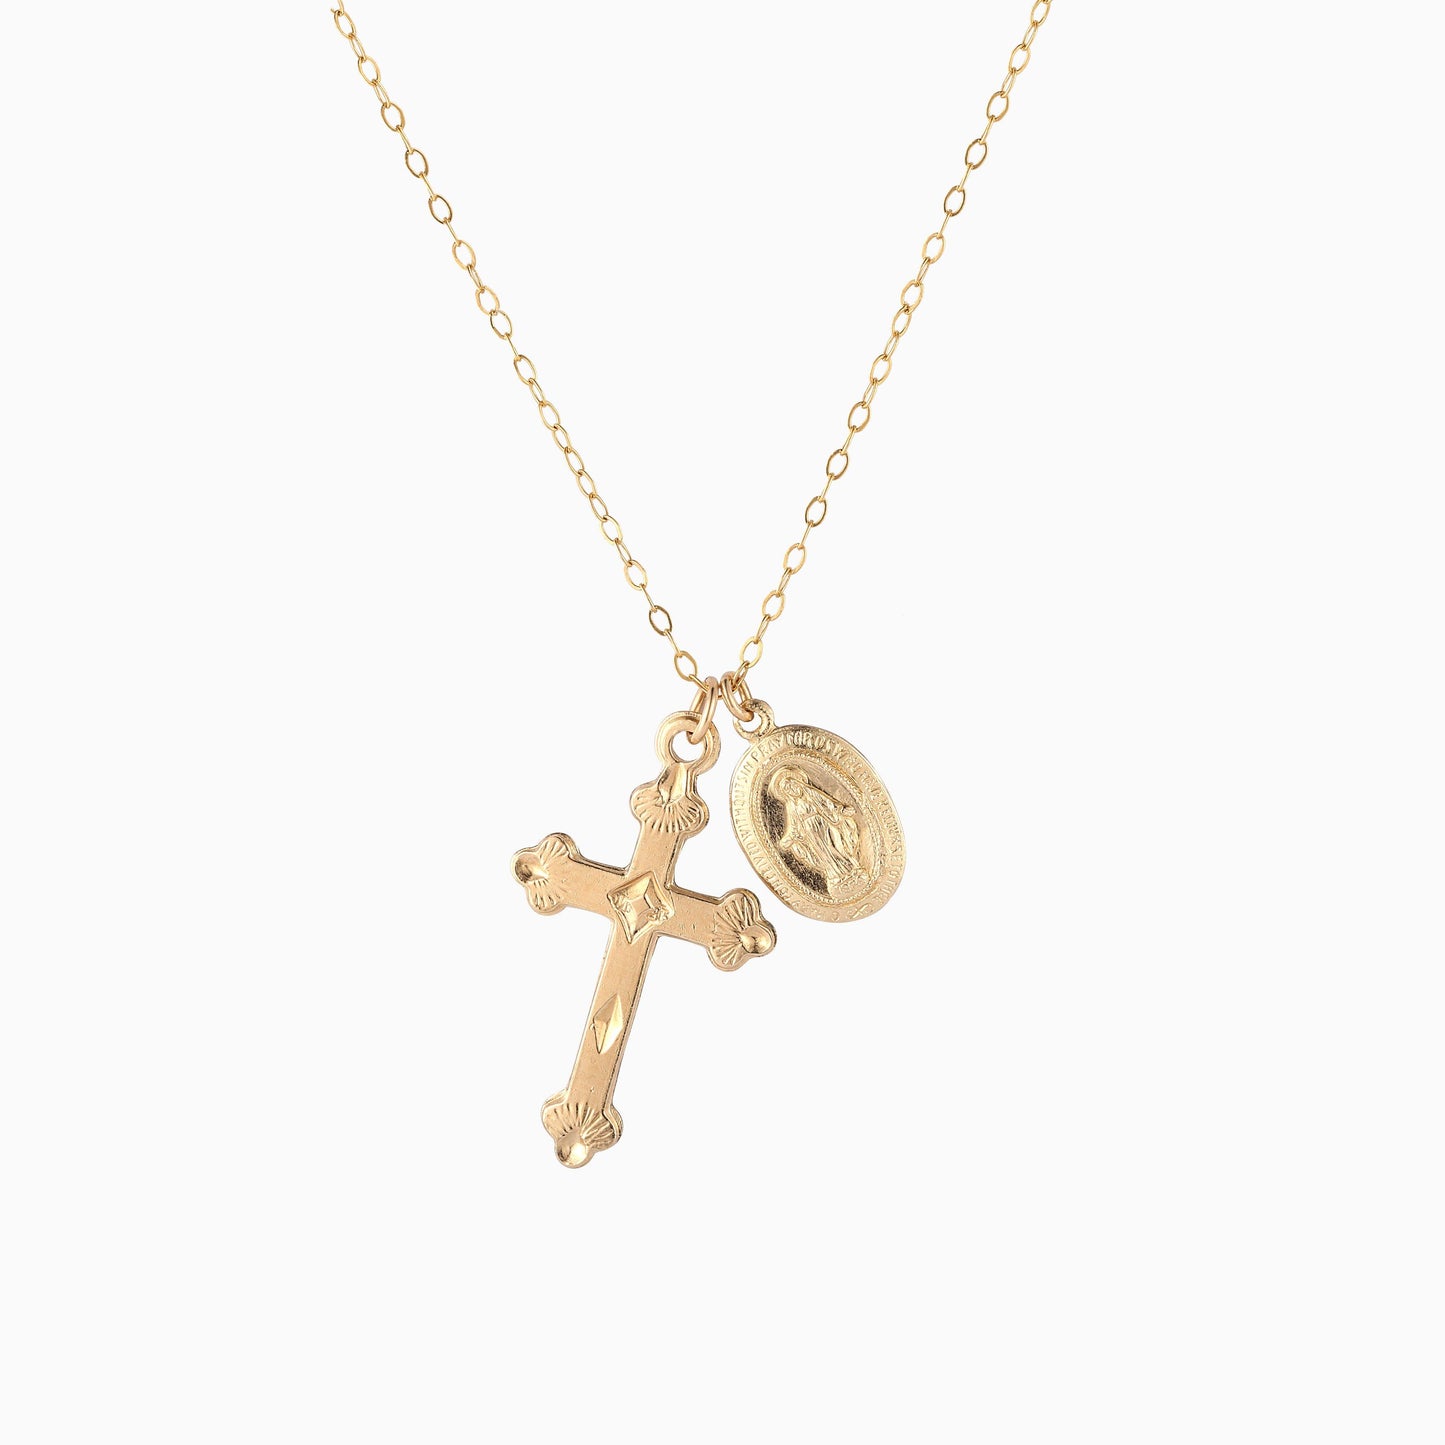 Large Vintage Cross and Coin Necklace - 14K Gold Filled - Studdedheartz